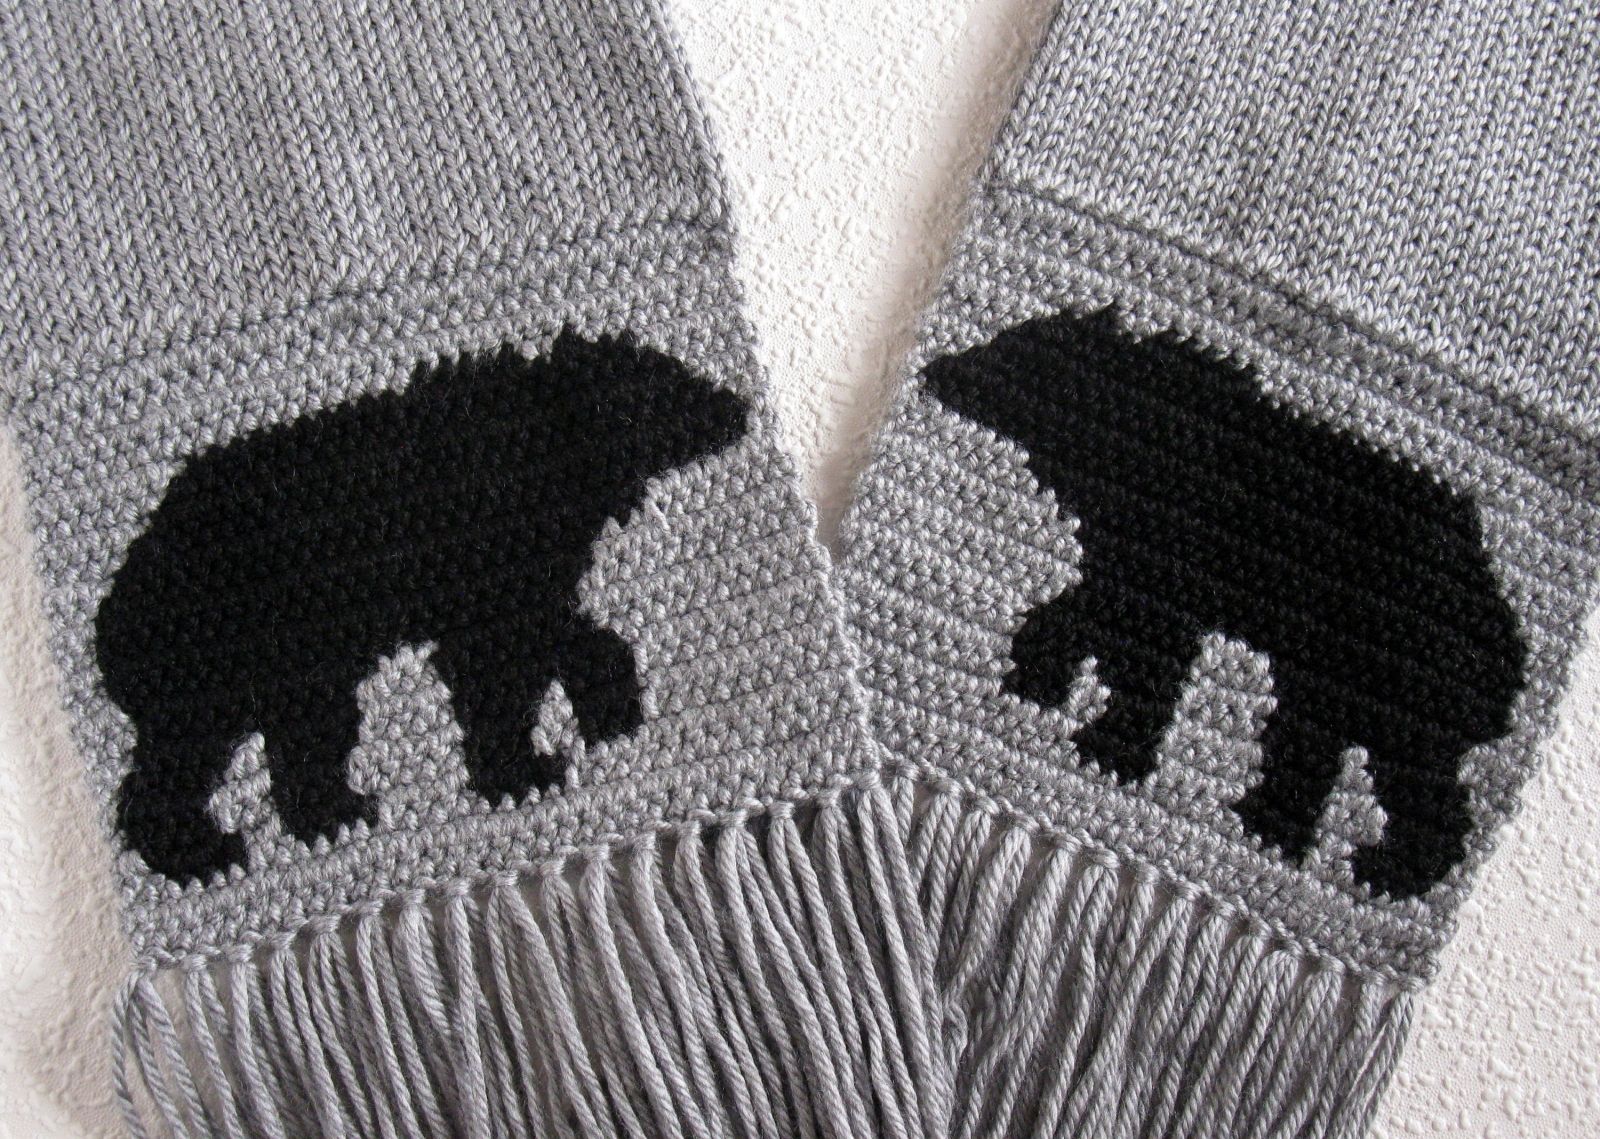 Knit Bear Scarf. Long, gray knitted and crochet scarf with black bears